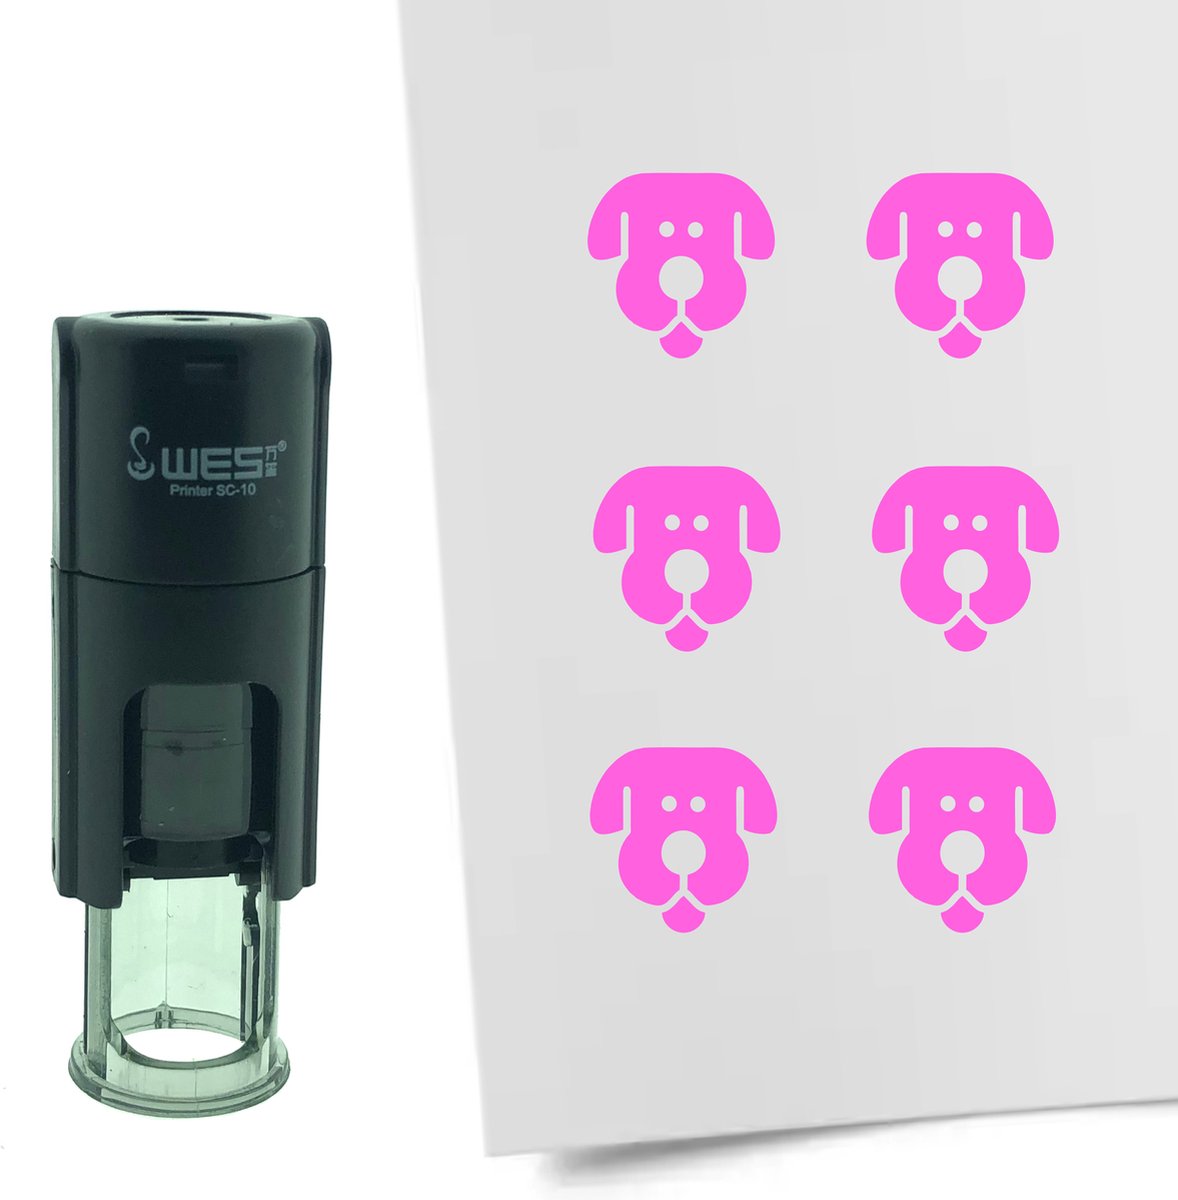 CombiCraft Stempel Hond 10mm rond - roze inkt